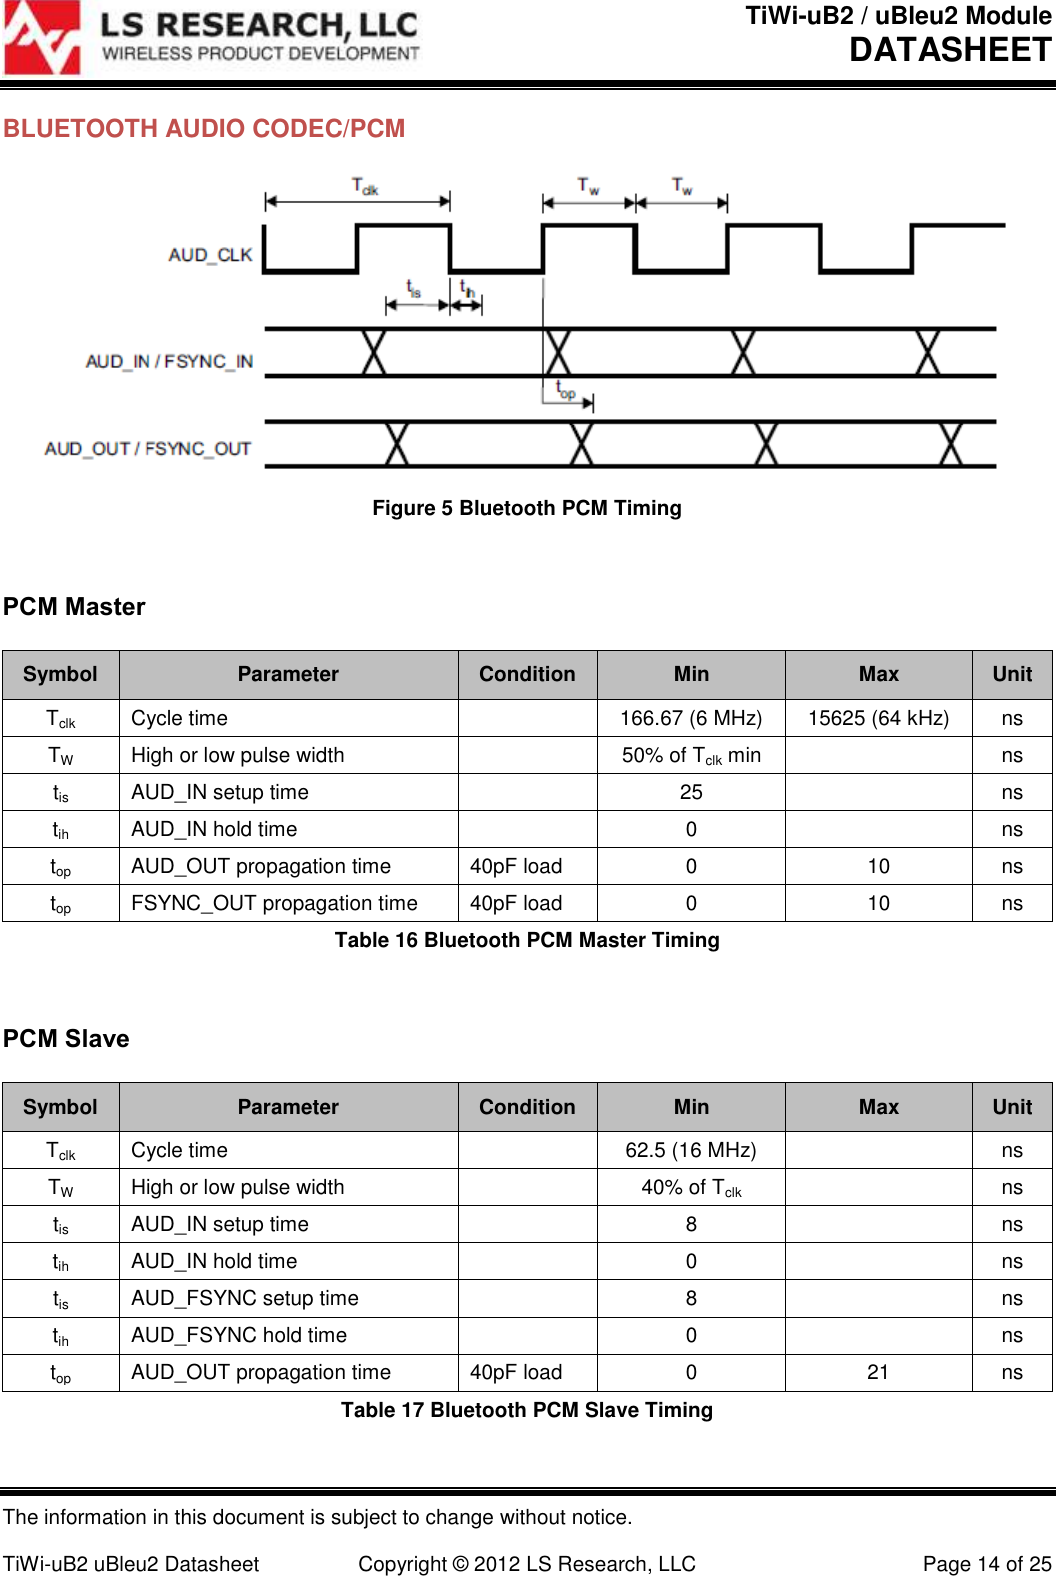 TiWi-uB2 / uBleu2 Module DATASHEET  The information in this document is subject to change without notice.  TiWi-uB2 uBleu2 Datasheet  Copyright © 2012 LS Research, LLC  Page 14 of 25 BLUETOOTH AUDIO CODEC/PCM  Figure 5 Bluetooth PCM Timing  PCM Master  Symbol Parameter Condition Min Max Unit Tclk Cycle time  166.67 (6 MHz) 15625 (64 kHz) ns TW High or low pulse width  50% of Tclk min  ns tis AUD_IN setup time  25  ns tih AUD_IN hold time  0  ns top AUD_OUT propagation time 40pF load 0 10 ns top FSYNC_OUT propagation time 40pF load 0 10 ns Table 16 Bluetooth PCM Master Timing  PCM Slave  Symbol Parameter Condition Min Max Unit Tclk Cycle time  62.5 (16 MHz)  ns TW High or low pulse width  40% of Tclk  ns tis AUD_IN setup time  8  ns tih AUD_IN hold time  0  ns tis AUD_FSYNC setup time  8  ns tih AUD_FSYNC hold time  0  ns top AUD_OUT propagation time 40pF load 0 21 ns Table 17 Bluetooth PCM Slave Timing 